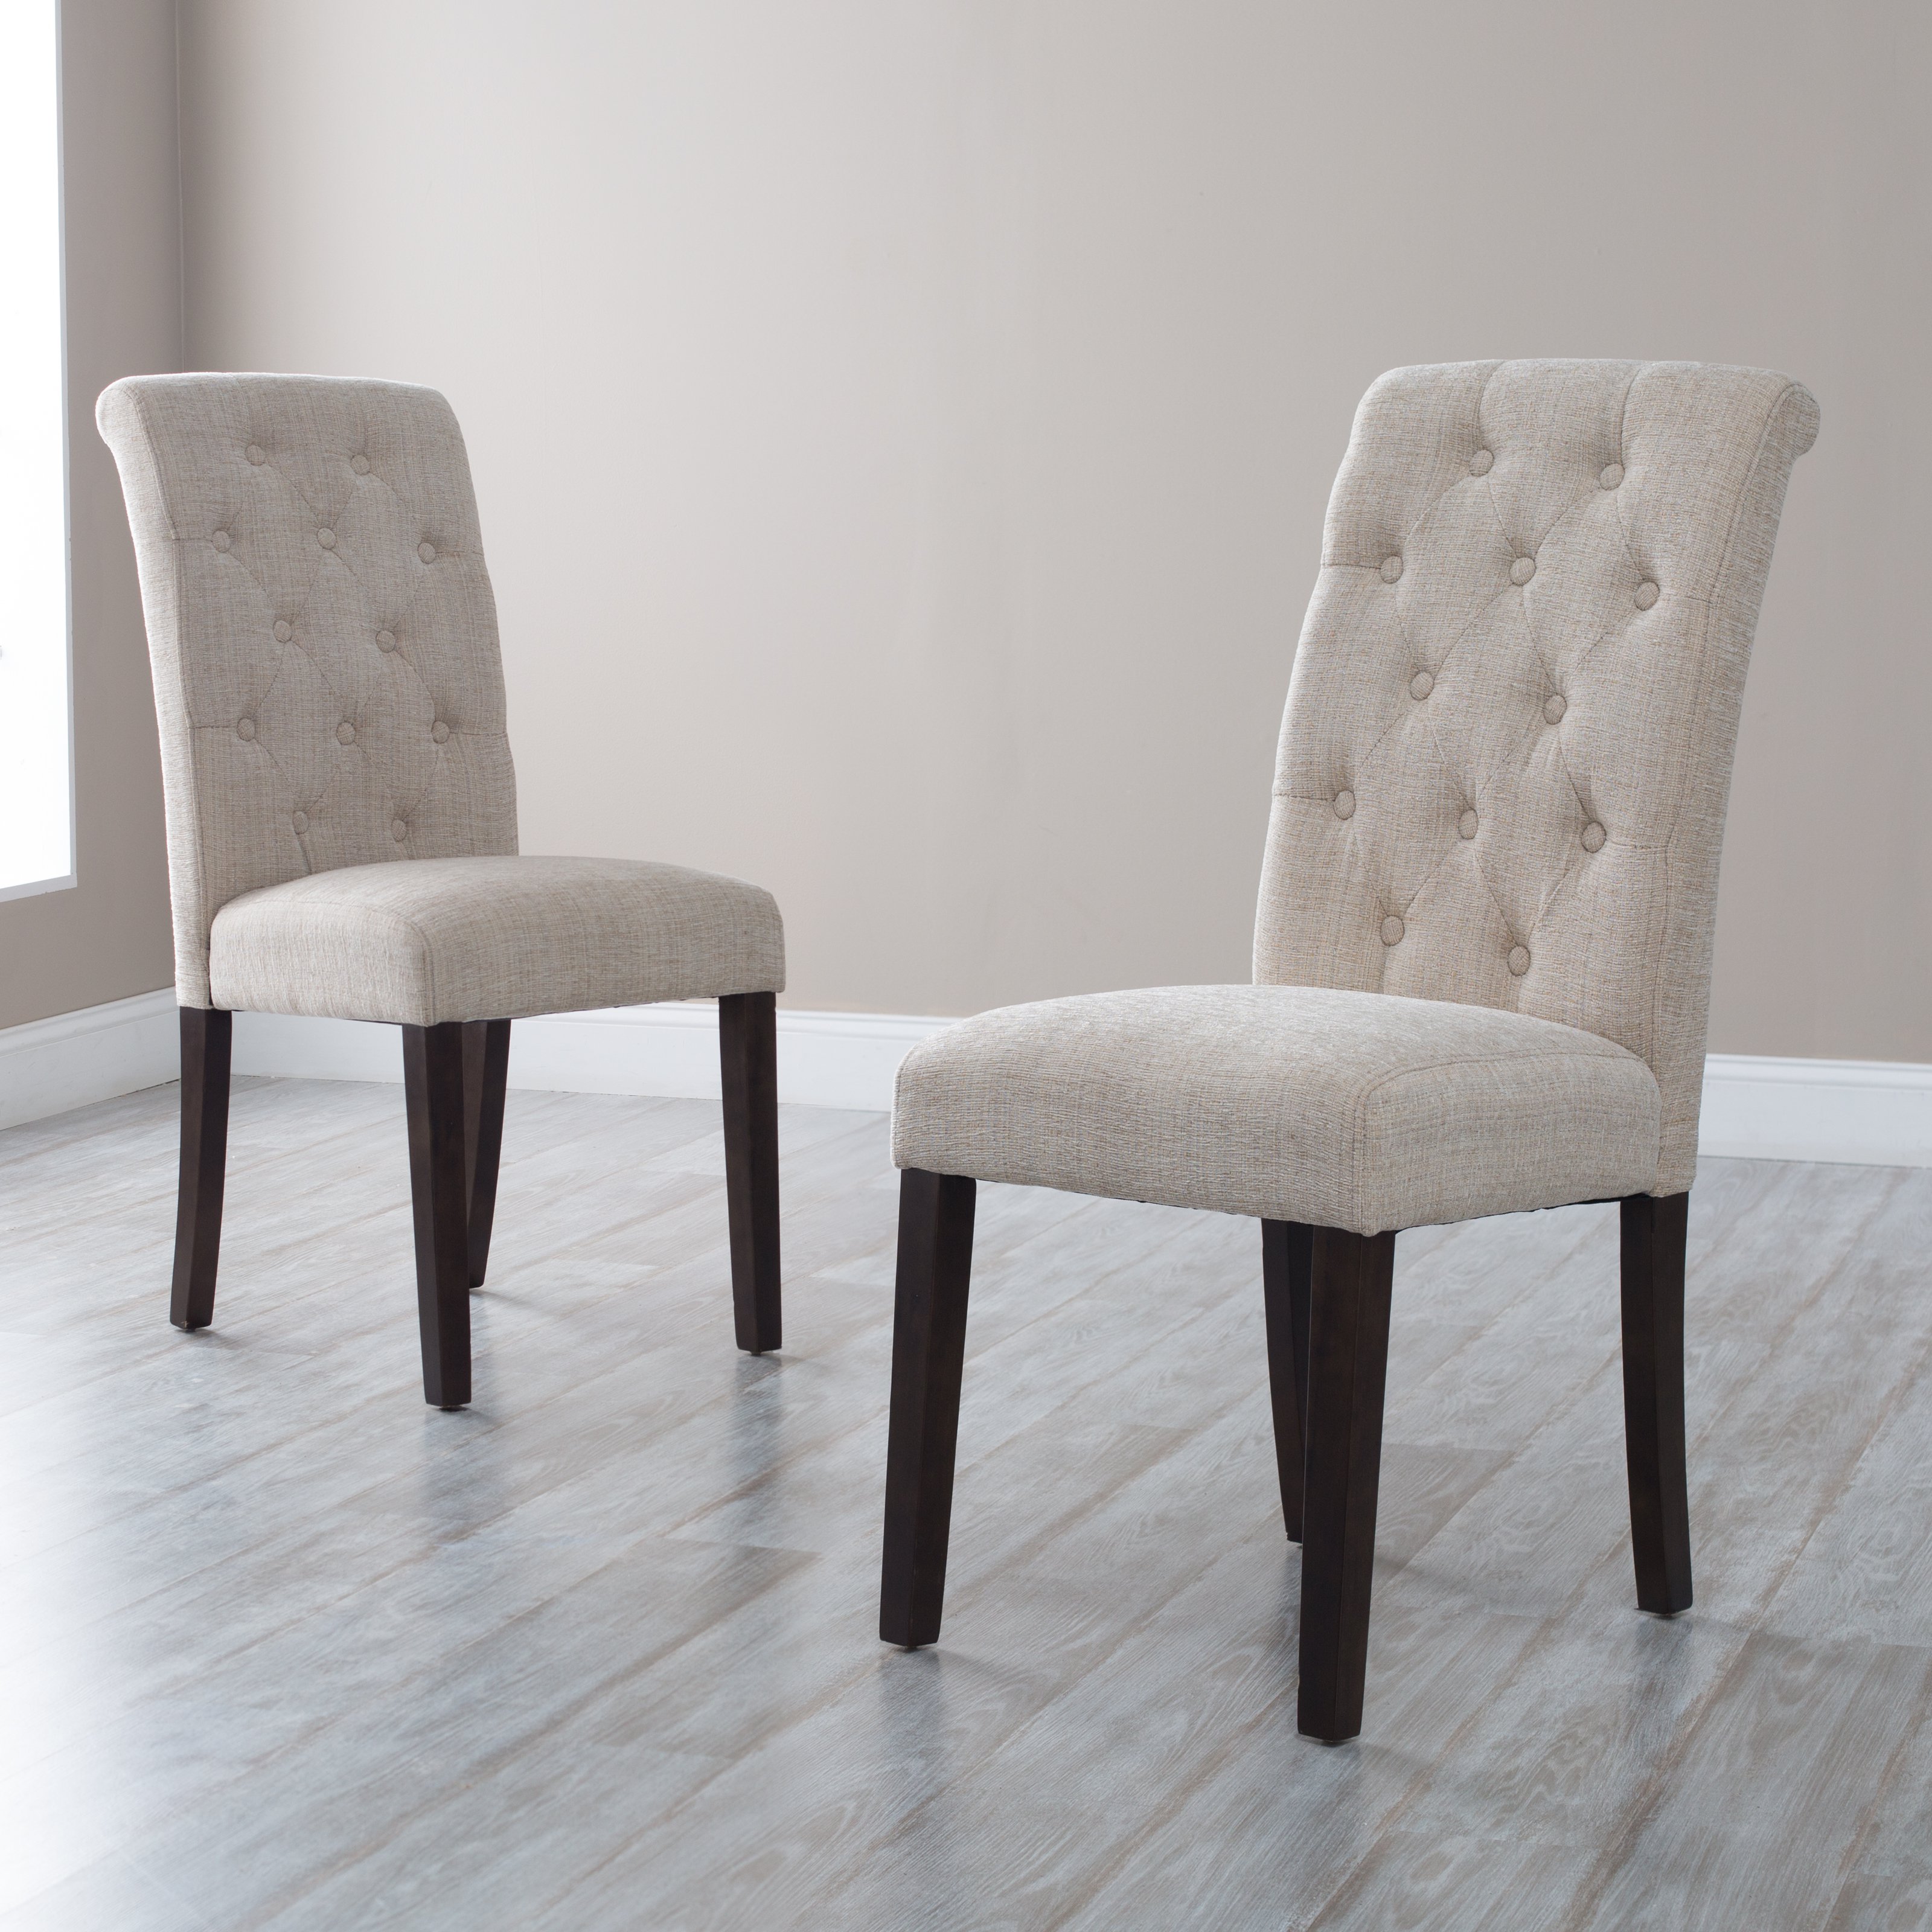 Amazing Morgana Tufted Parsons Dining Chair - Set of 2 - Dining Chairs parsons dining chairs